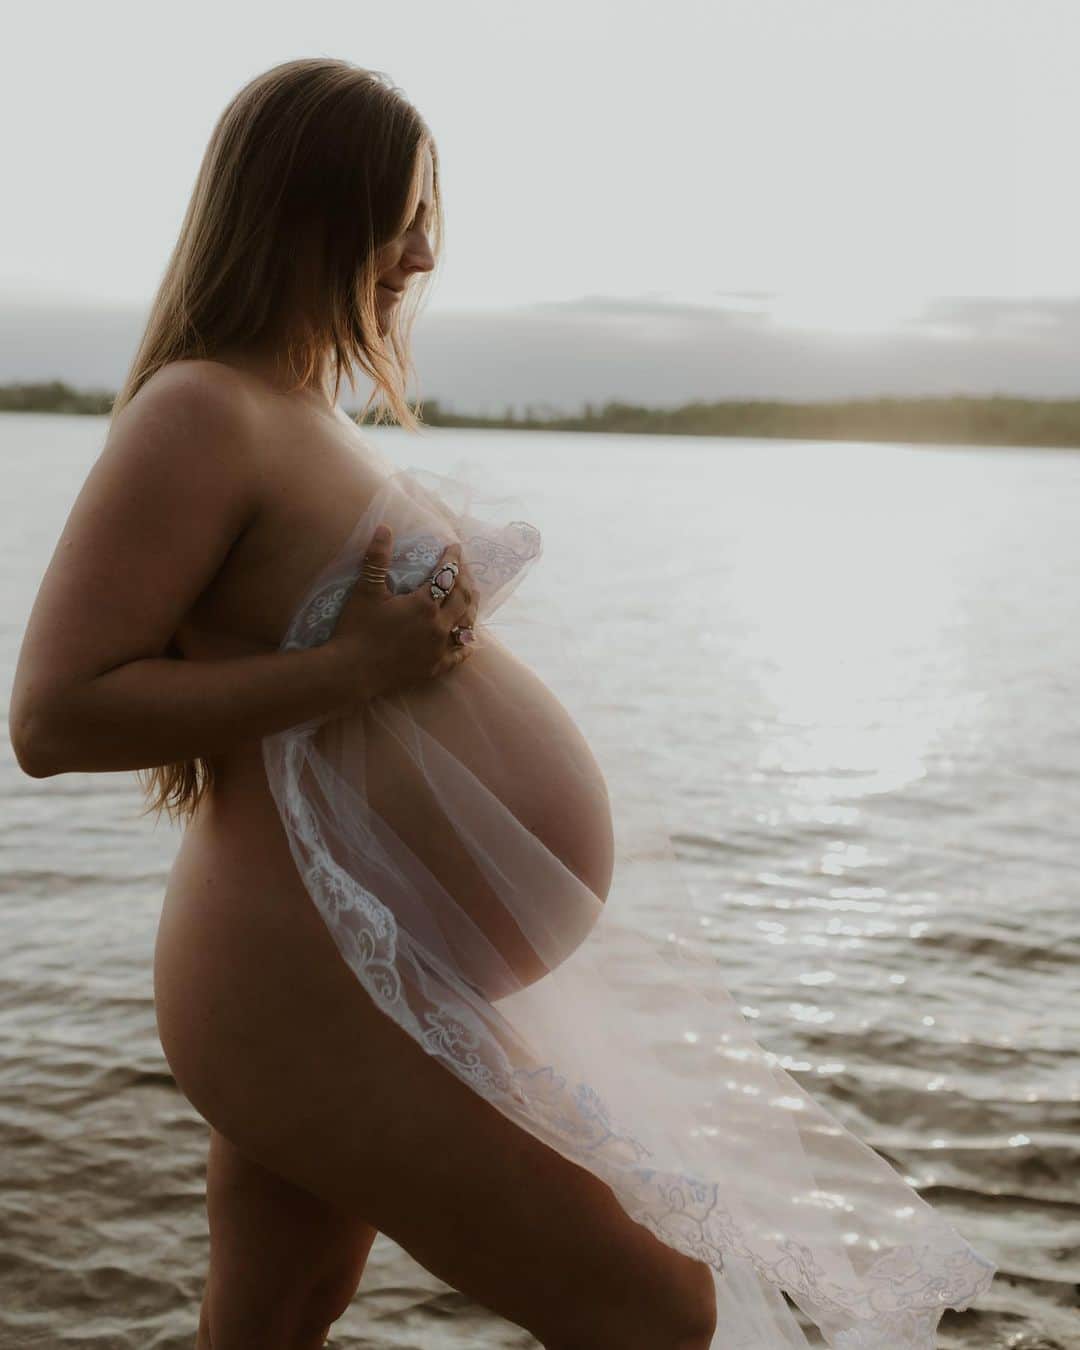 レイチェル・ブレイセンのインスタグラム：「41 weeks of pregnancy🌸   Just like his sister, this little guy is not showing any signs of wanting to arrive quite yet and in contrast to my first pregnancy, I feel so, so good. Polar opposite compared to the first time around!  When I reached 41 weeks with Lea I was under so much pressure and stress I wasn’t able to enjoy my last days of pregnancy at all. I was shuffled between hospital visits, ultrasounds and midwives telling me I was a ticking bomb about to implode. Instead of supported I was threatened, coerced, and overall treated as if I was sick and like there was something truly wrong with me (when in fact I was a completely healthy and thriving 28-year old, with a healthy and thriving baby in my womb!). When I reached 41 weeks and refused to be induced, an OBGYN actually asked me “if I wanted my baby to live”. I mistakenly thought I would be able to have a natural pregnancy and birth experience while still committing myself to a medical system that is not only built on a foundation of deep misogyny, but designed to pathologize and medicalize what is actually the most vibrant, thriving time of a woman’s life.  This pregnancy is so very different. 41 weeks feels like a walk in the park (it basically is!). I’m spending my days by the lake; resting, swimming, reading, drinking tea… Been foraging a bit, nesting tons, I go for a dip down by the dock several times a day and am mostly just walking around the land, enjoying the absolute marvel of nature. I keep looking up at the trees, finding myself in such awe of it all that I can’t help but to say thank you out loud.   Of course I oscillate between big feelings and thoughts; what will labor be like? When will I feel those first sensations? Can I really do this? Every day I cycle through some sort of conditioned fear that doesn’t belong to me and was never mine in the first place. Again and again, I arrive at a place of peace. Everything is so incredibly beautiful. My body. My baby. Our family. This place. This pregnancy.   I feel so lucky. Soon he’ll be in my arms and I’ll look back at this time as some of the most beautiful weeks of my entire life💛 #wildpregnancy   📸: @naomivonkphotography」